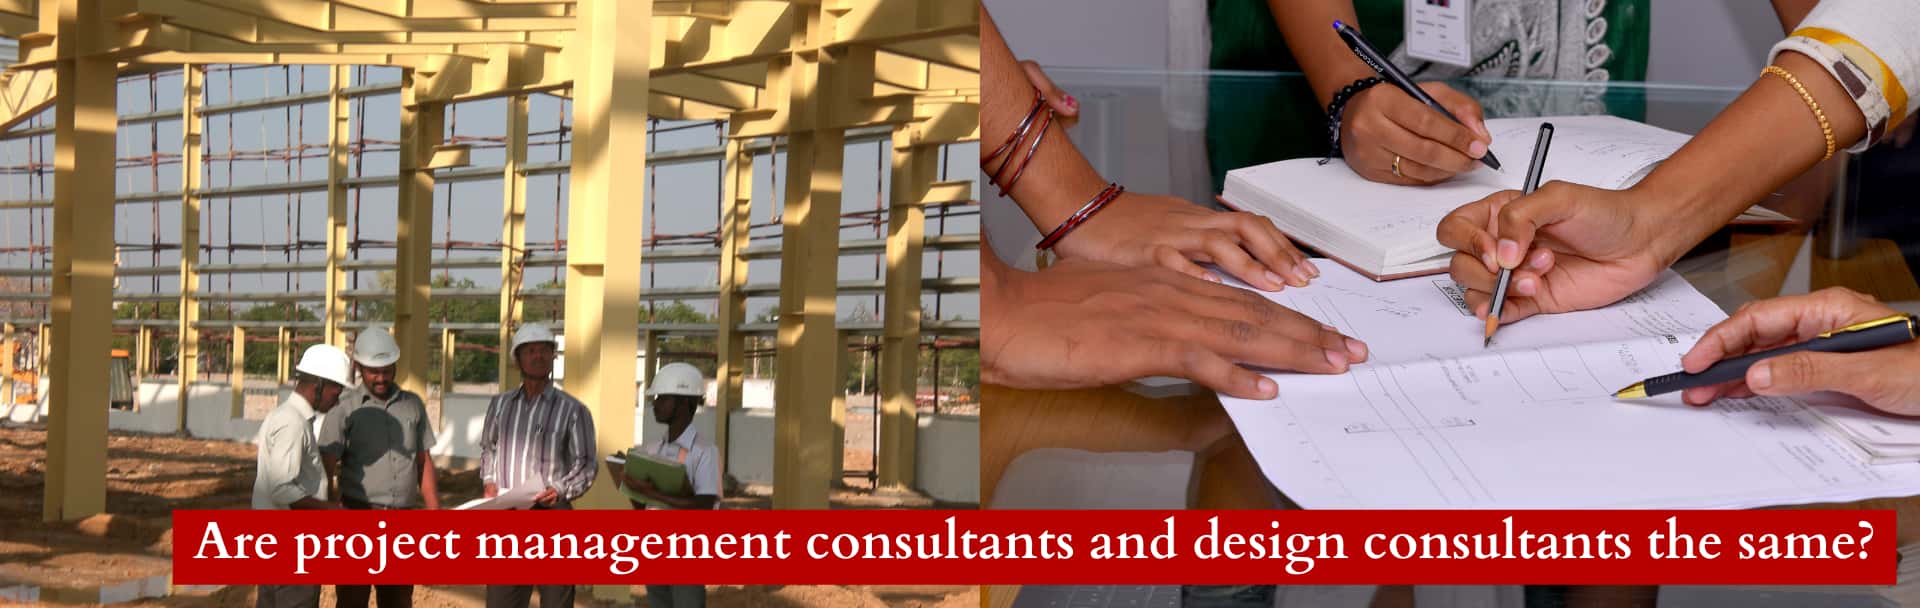 design consultant for industrial projects